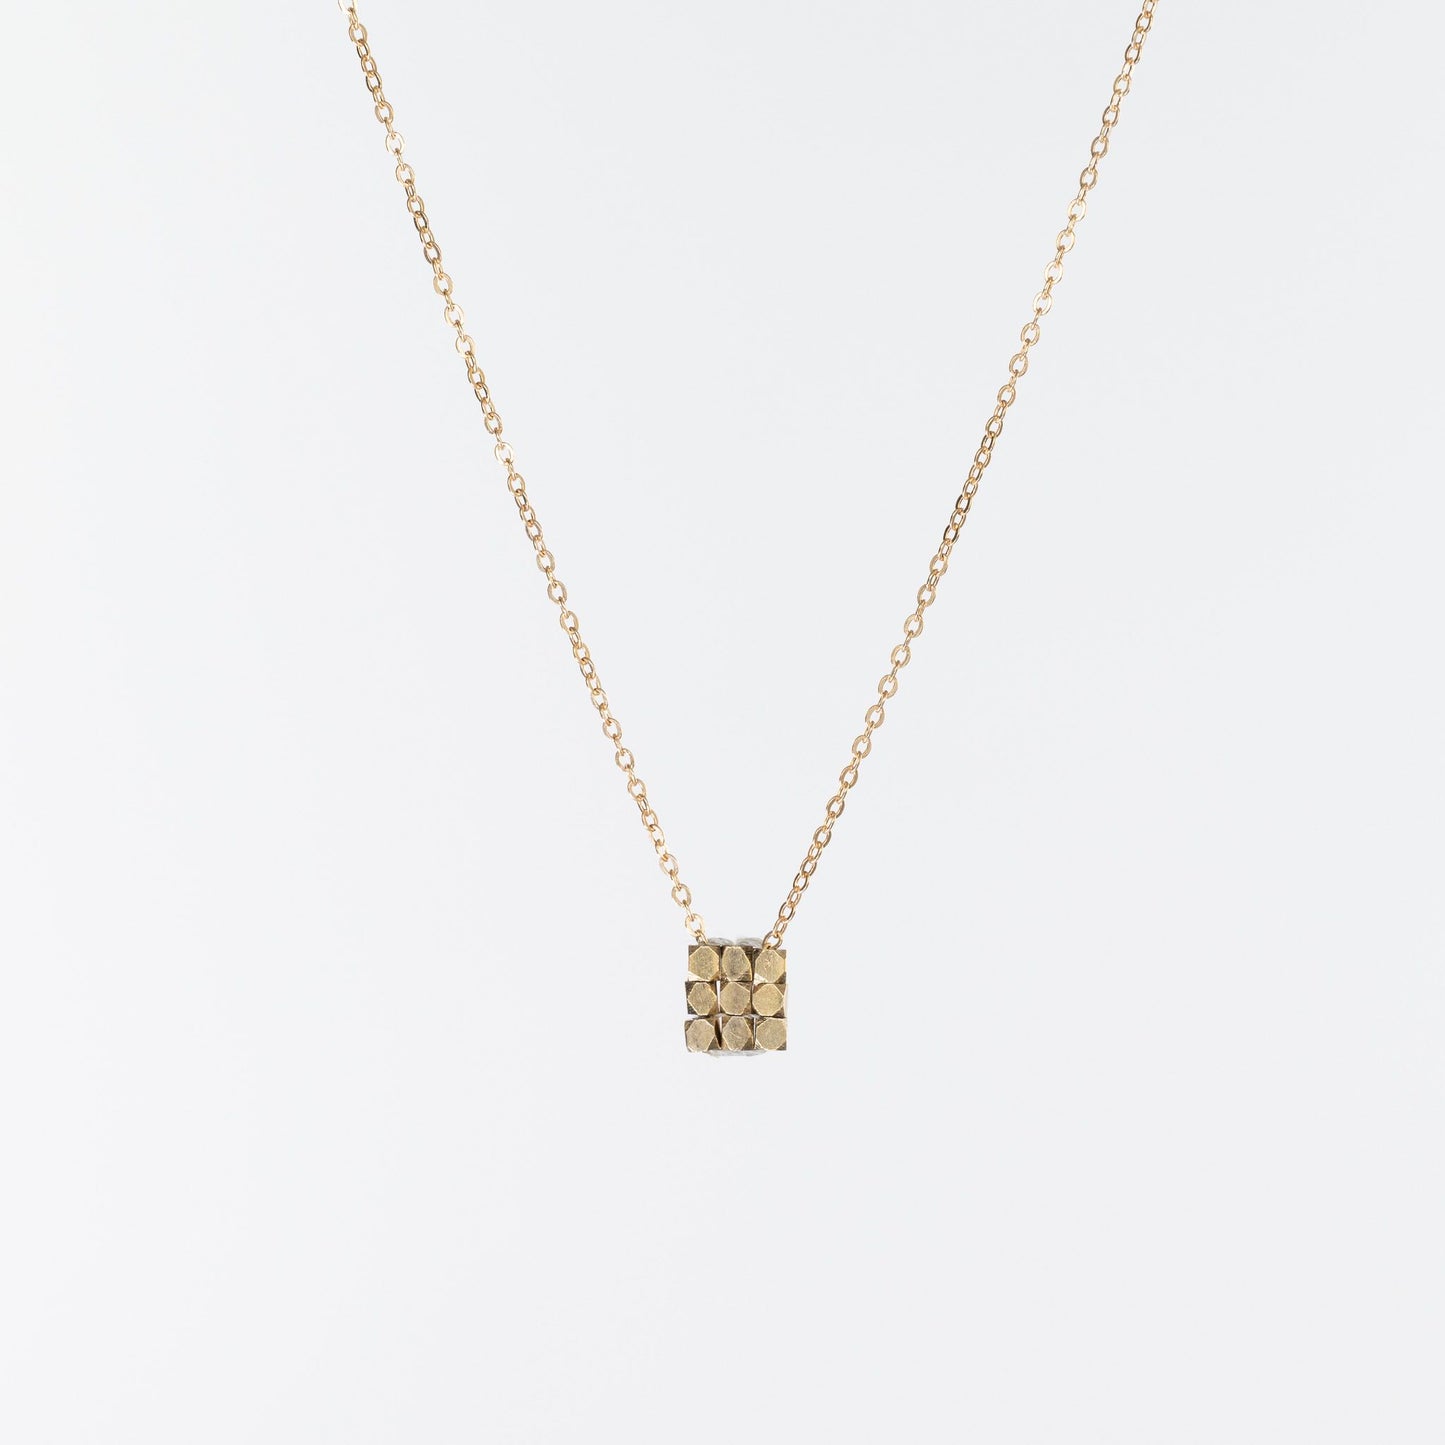 Danielle Welmond Woven Gold Square Bead Nugget Necklace